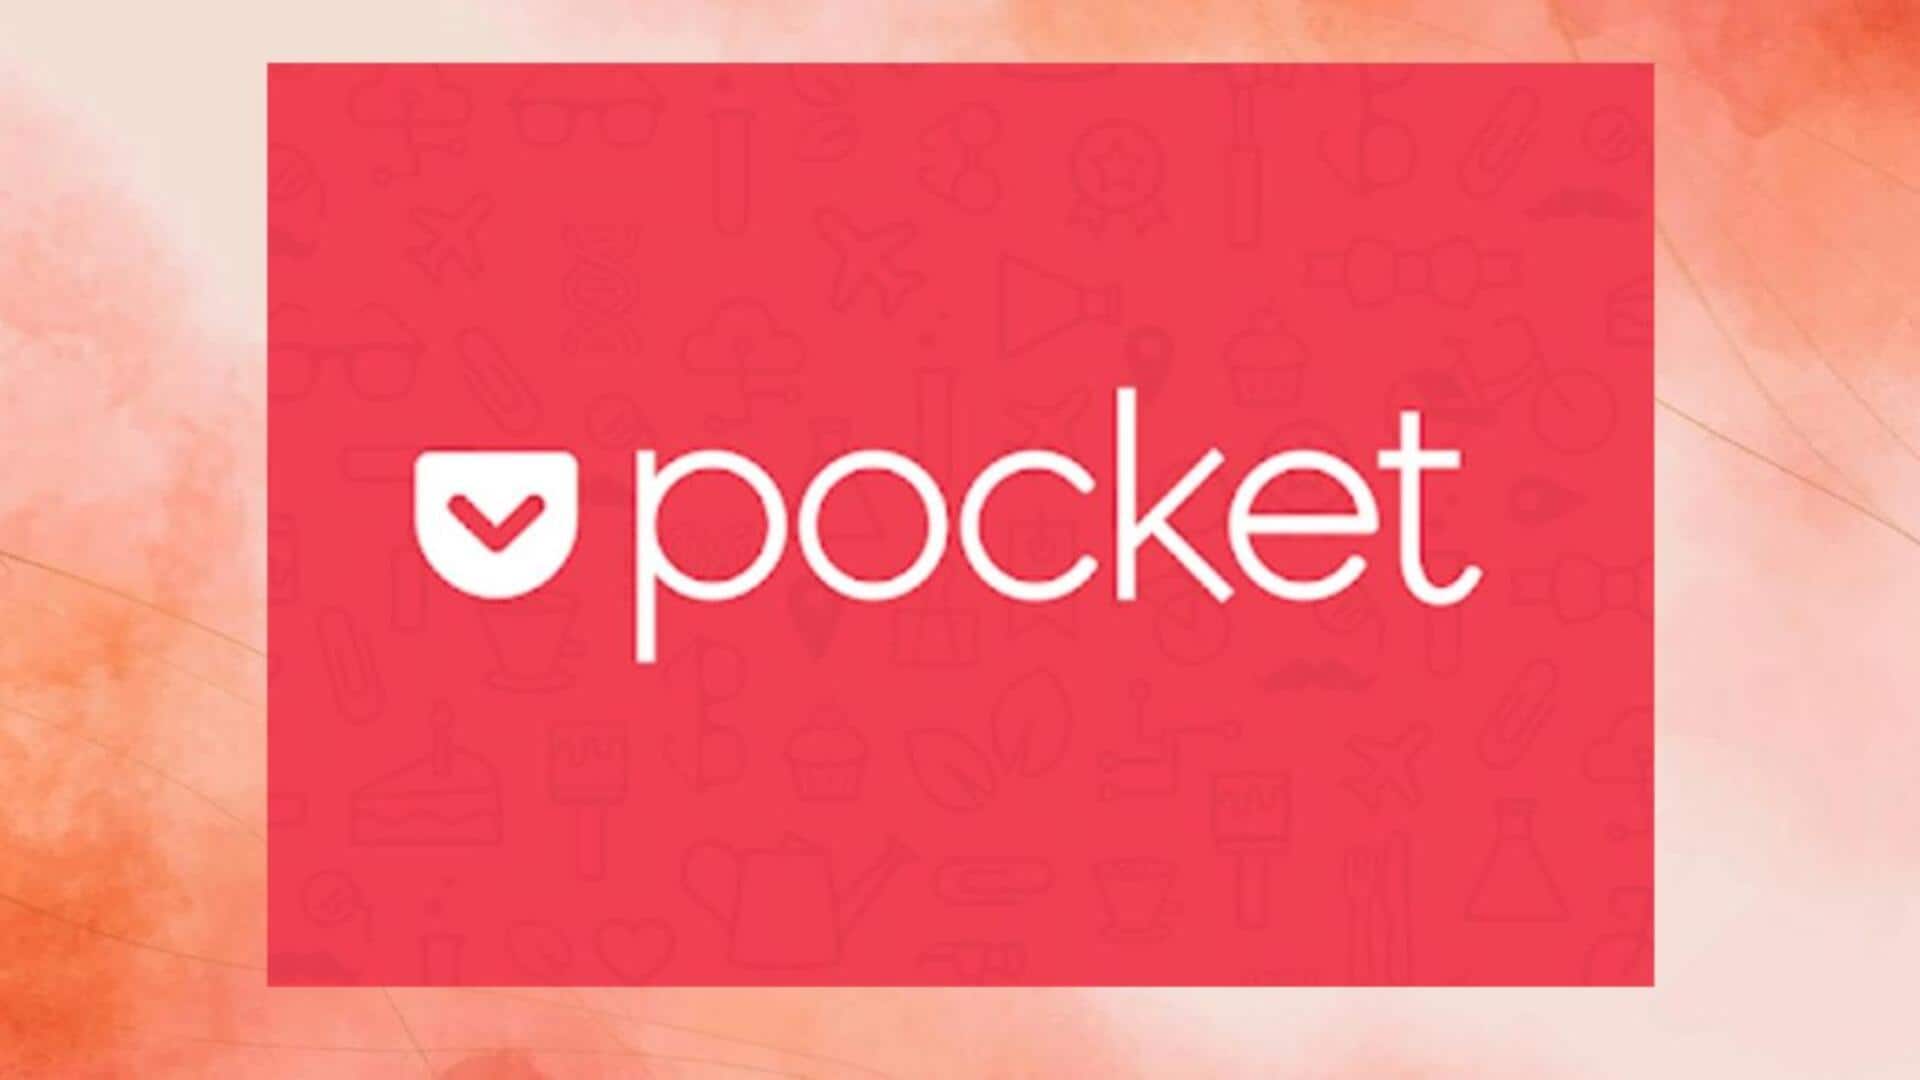 Use the Pocket app effectively with these tips